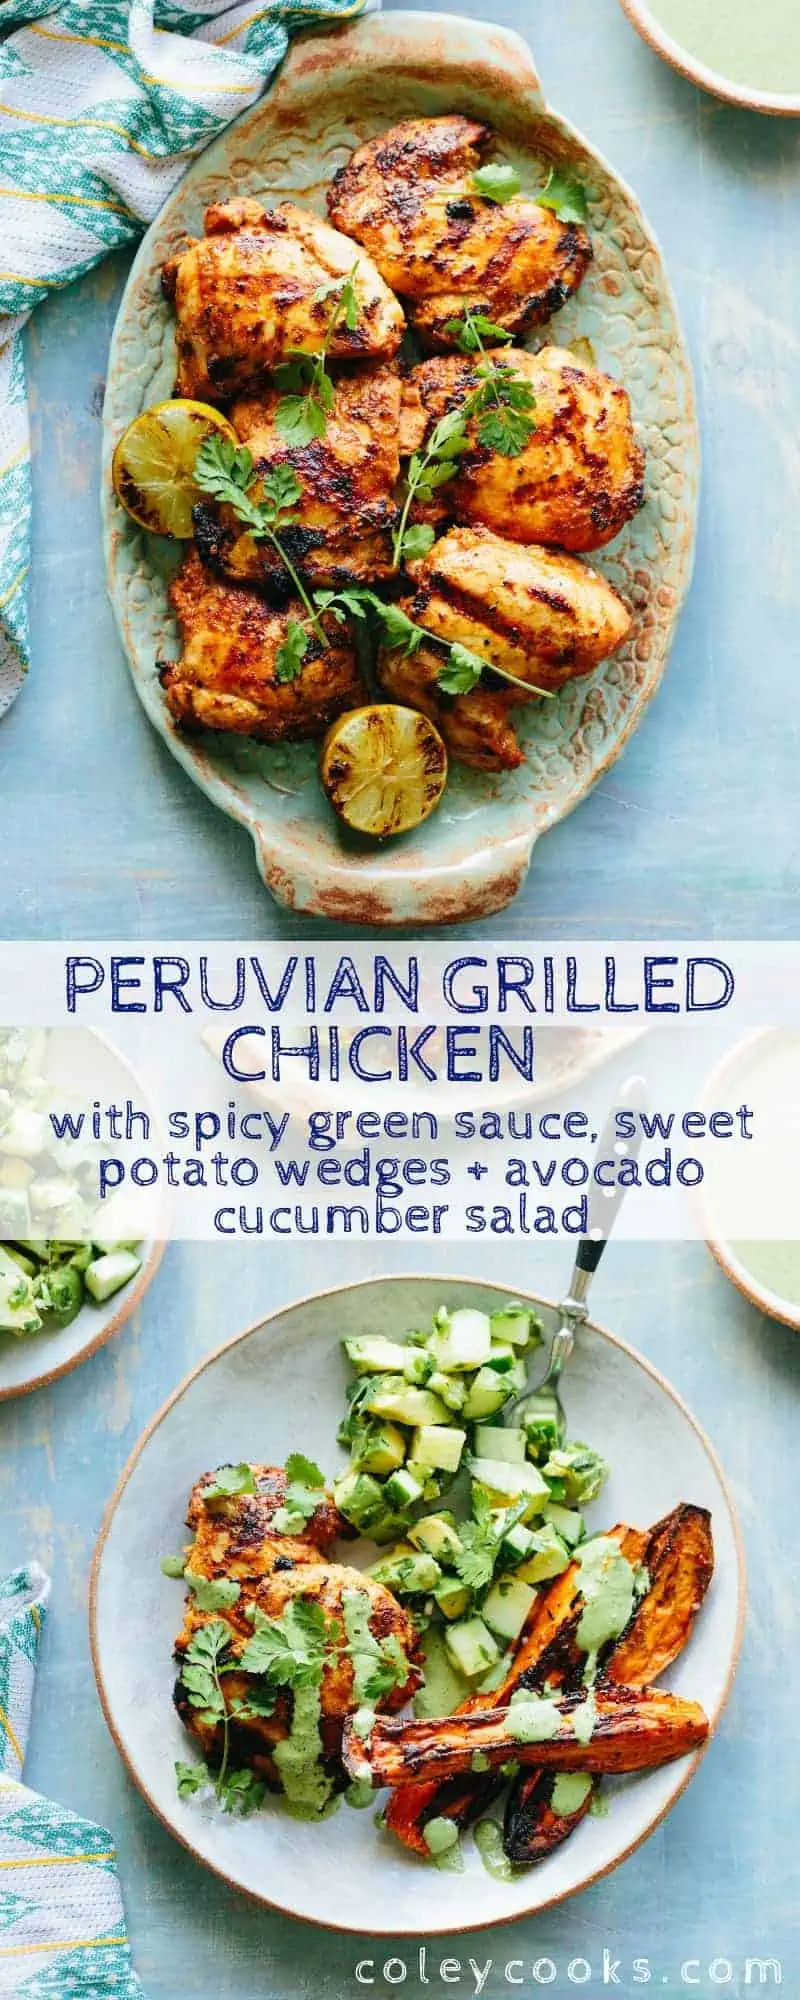 Pinterest collage of Peruvian grilled chicken thighs, cucumber avocado salad, and roasted sweet potato wedges.